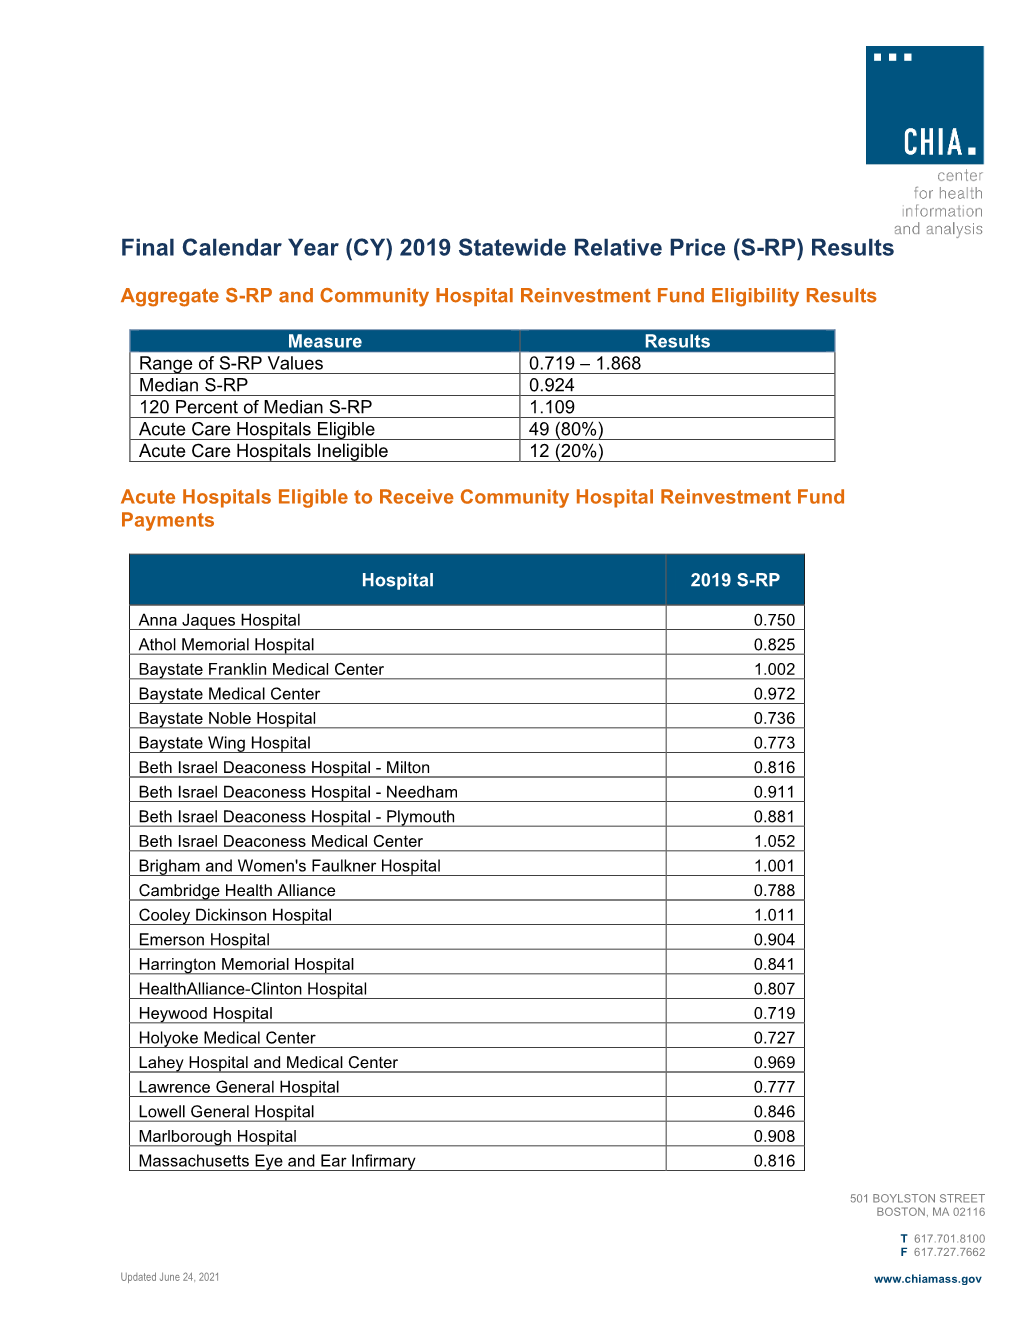 Final Calendar Year (CY) 2019 Statewide Relative Price (S-RP) Results